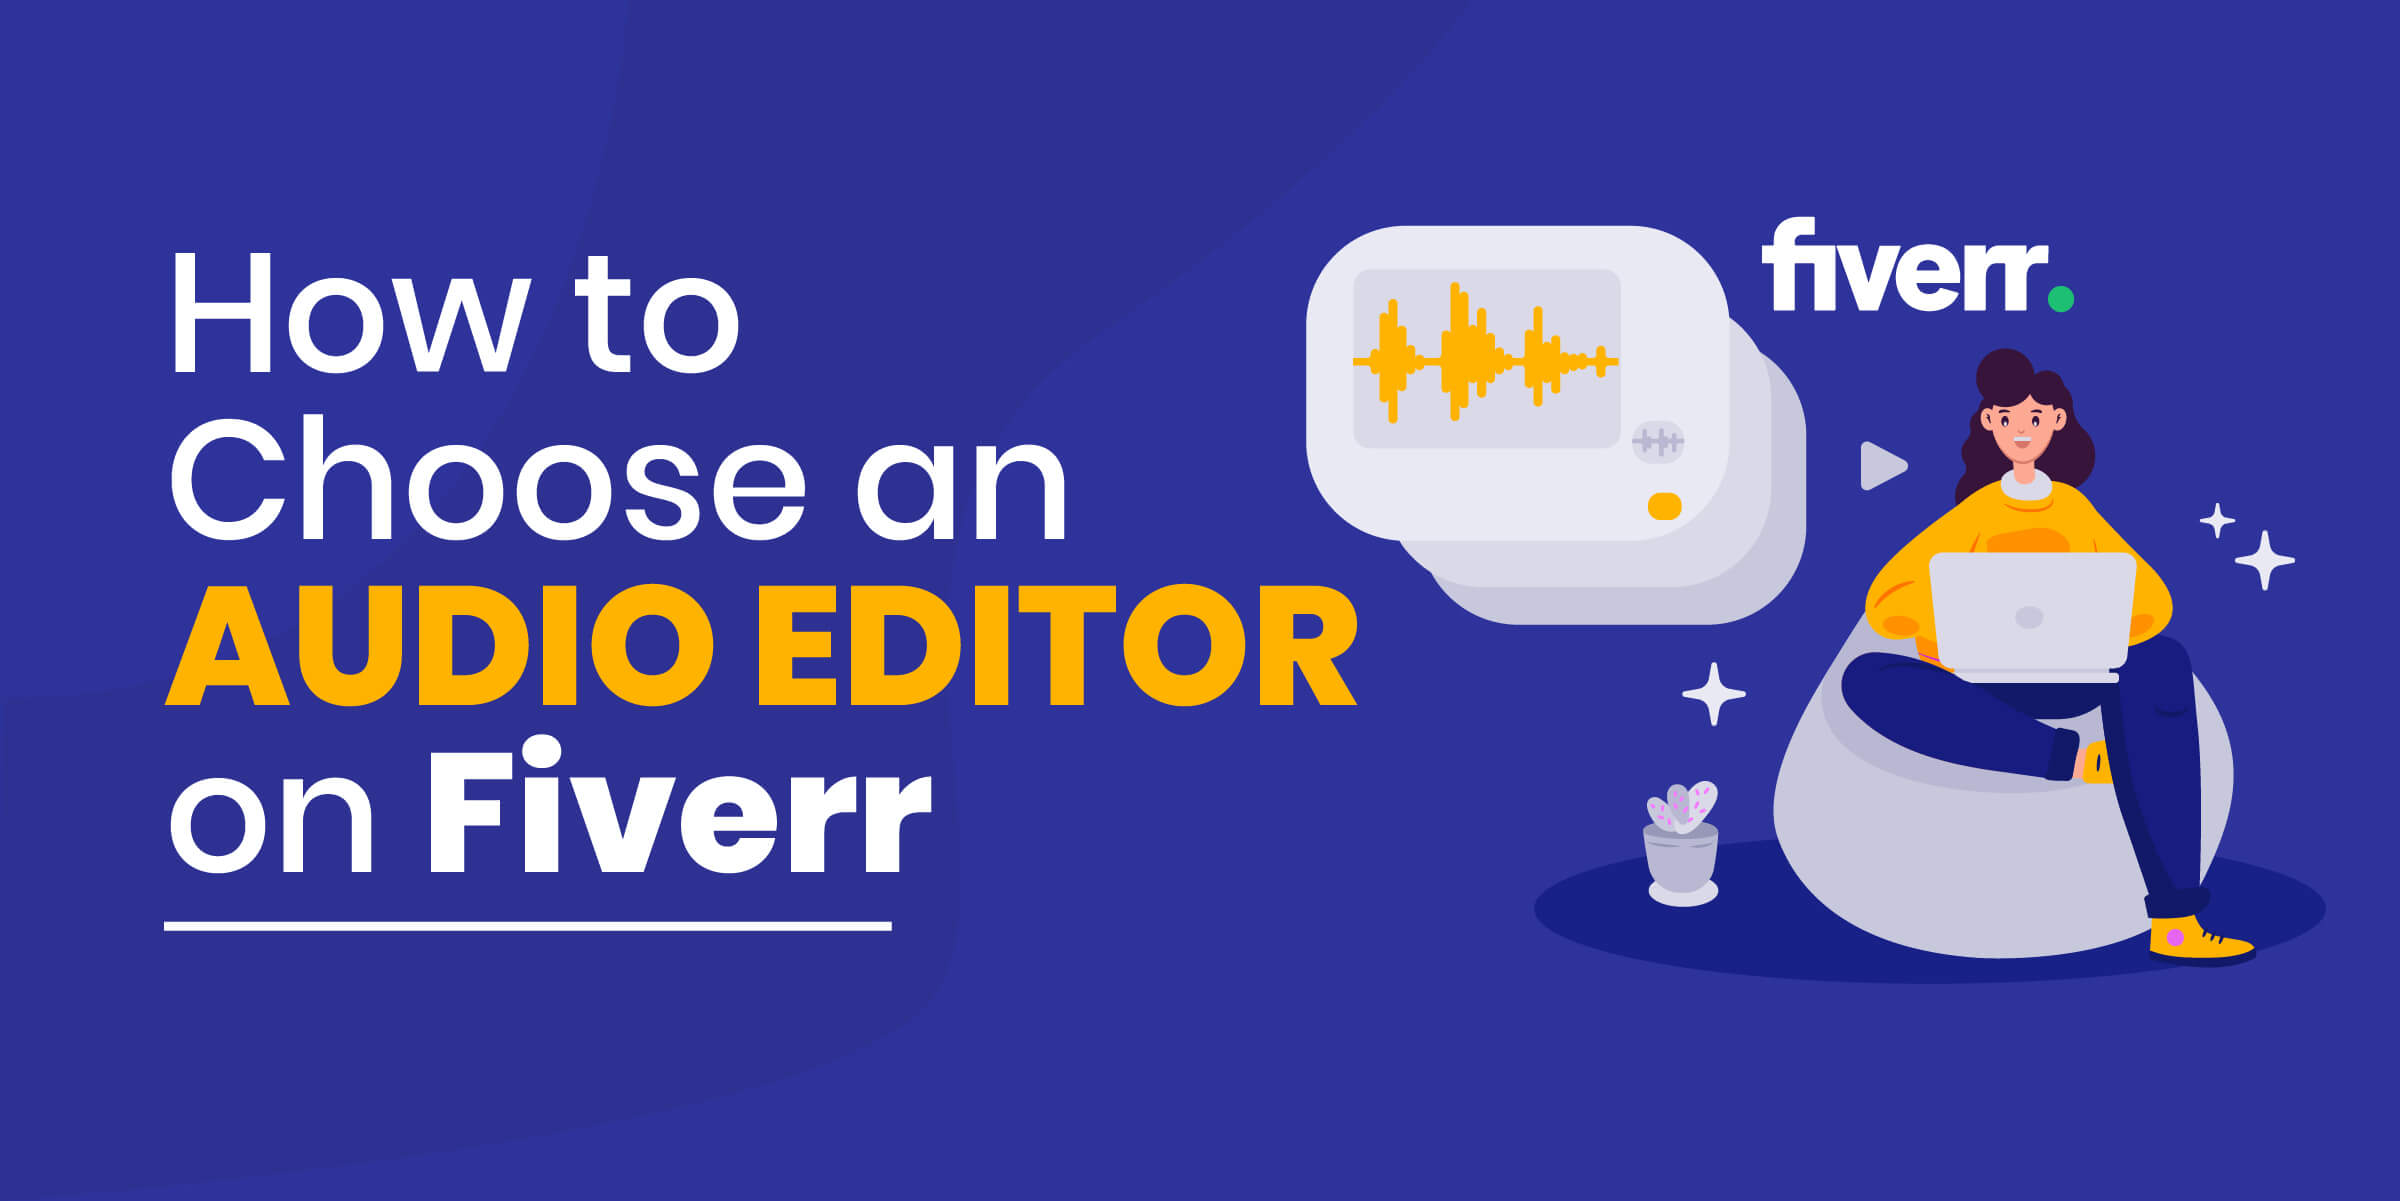 How to Choose Audio Editor Fiverr